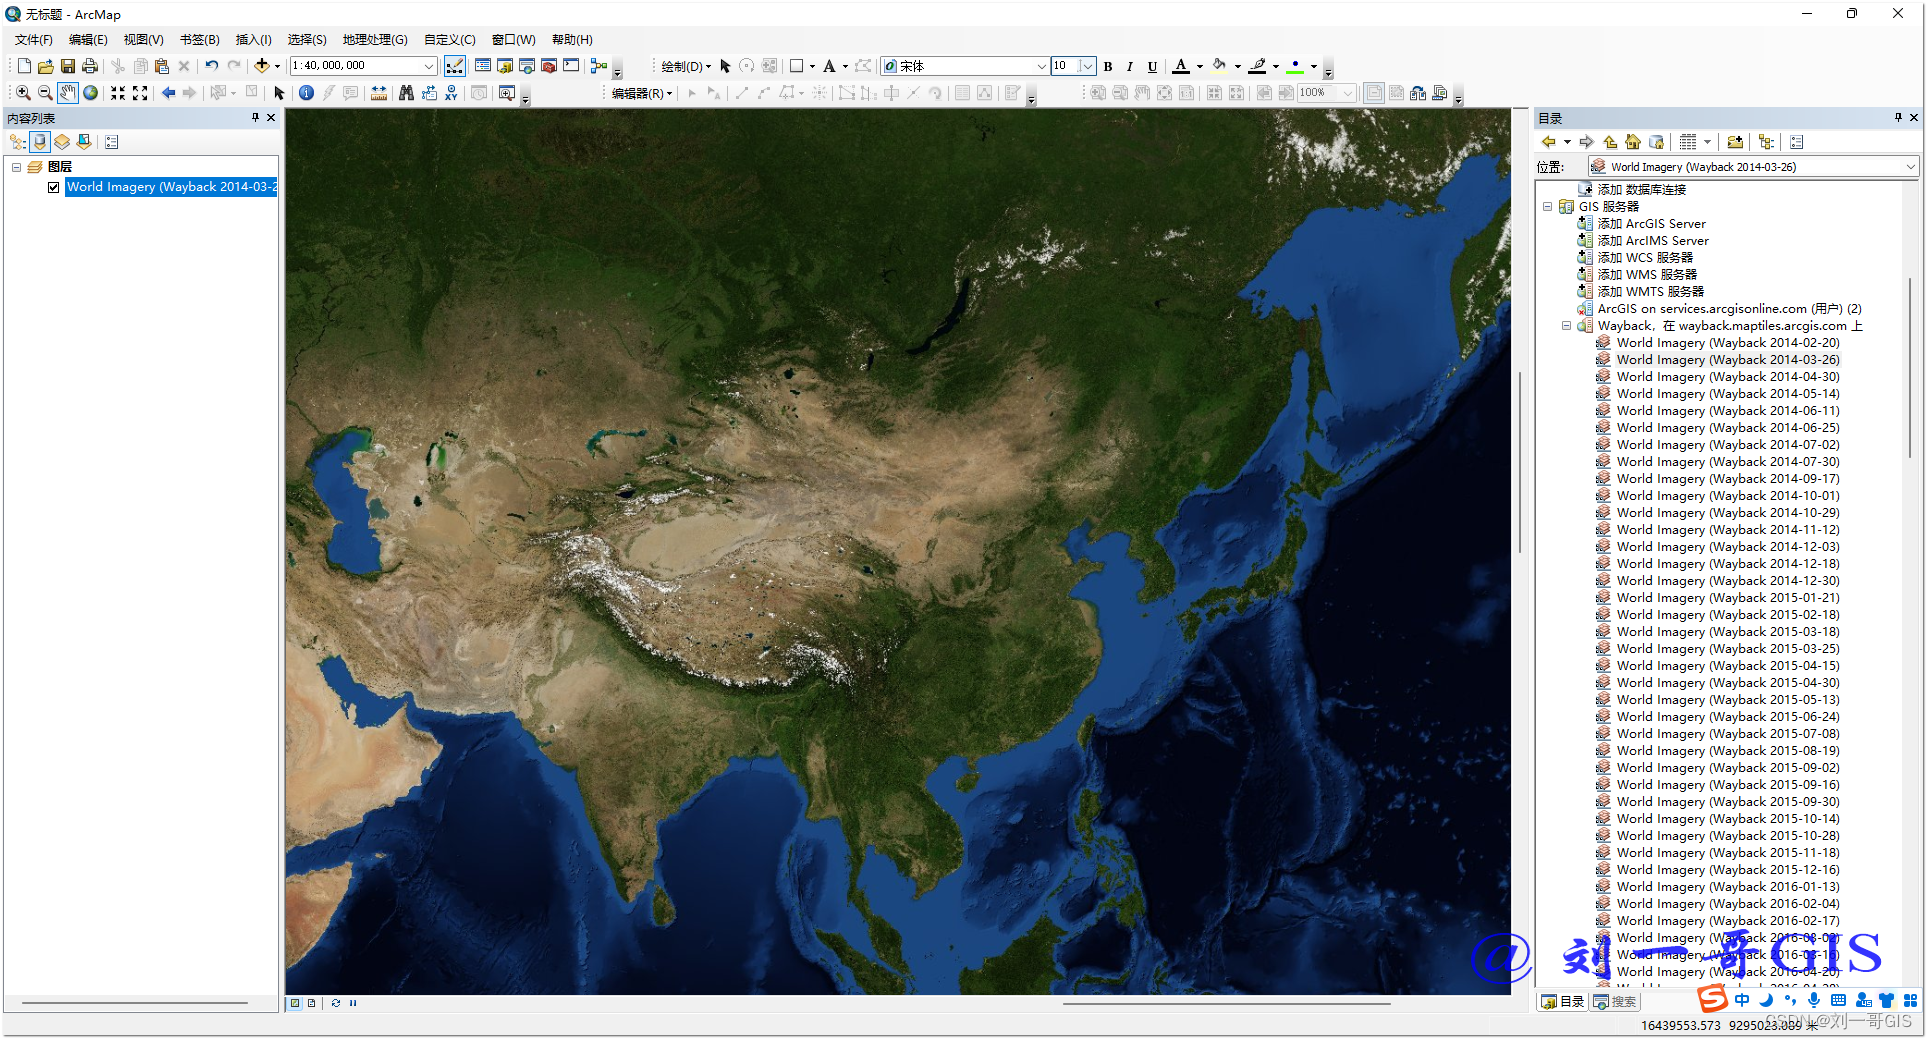 【<span style='color:red;'>ArcGIS</span>微课1000例】0107：<span style='color:red;'>ArcGIS</span>加载在线历史<span style='color:red;'>影像</span><span style='color:red;'>服务</span>WMTS